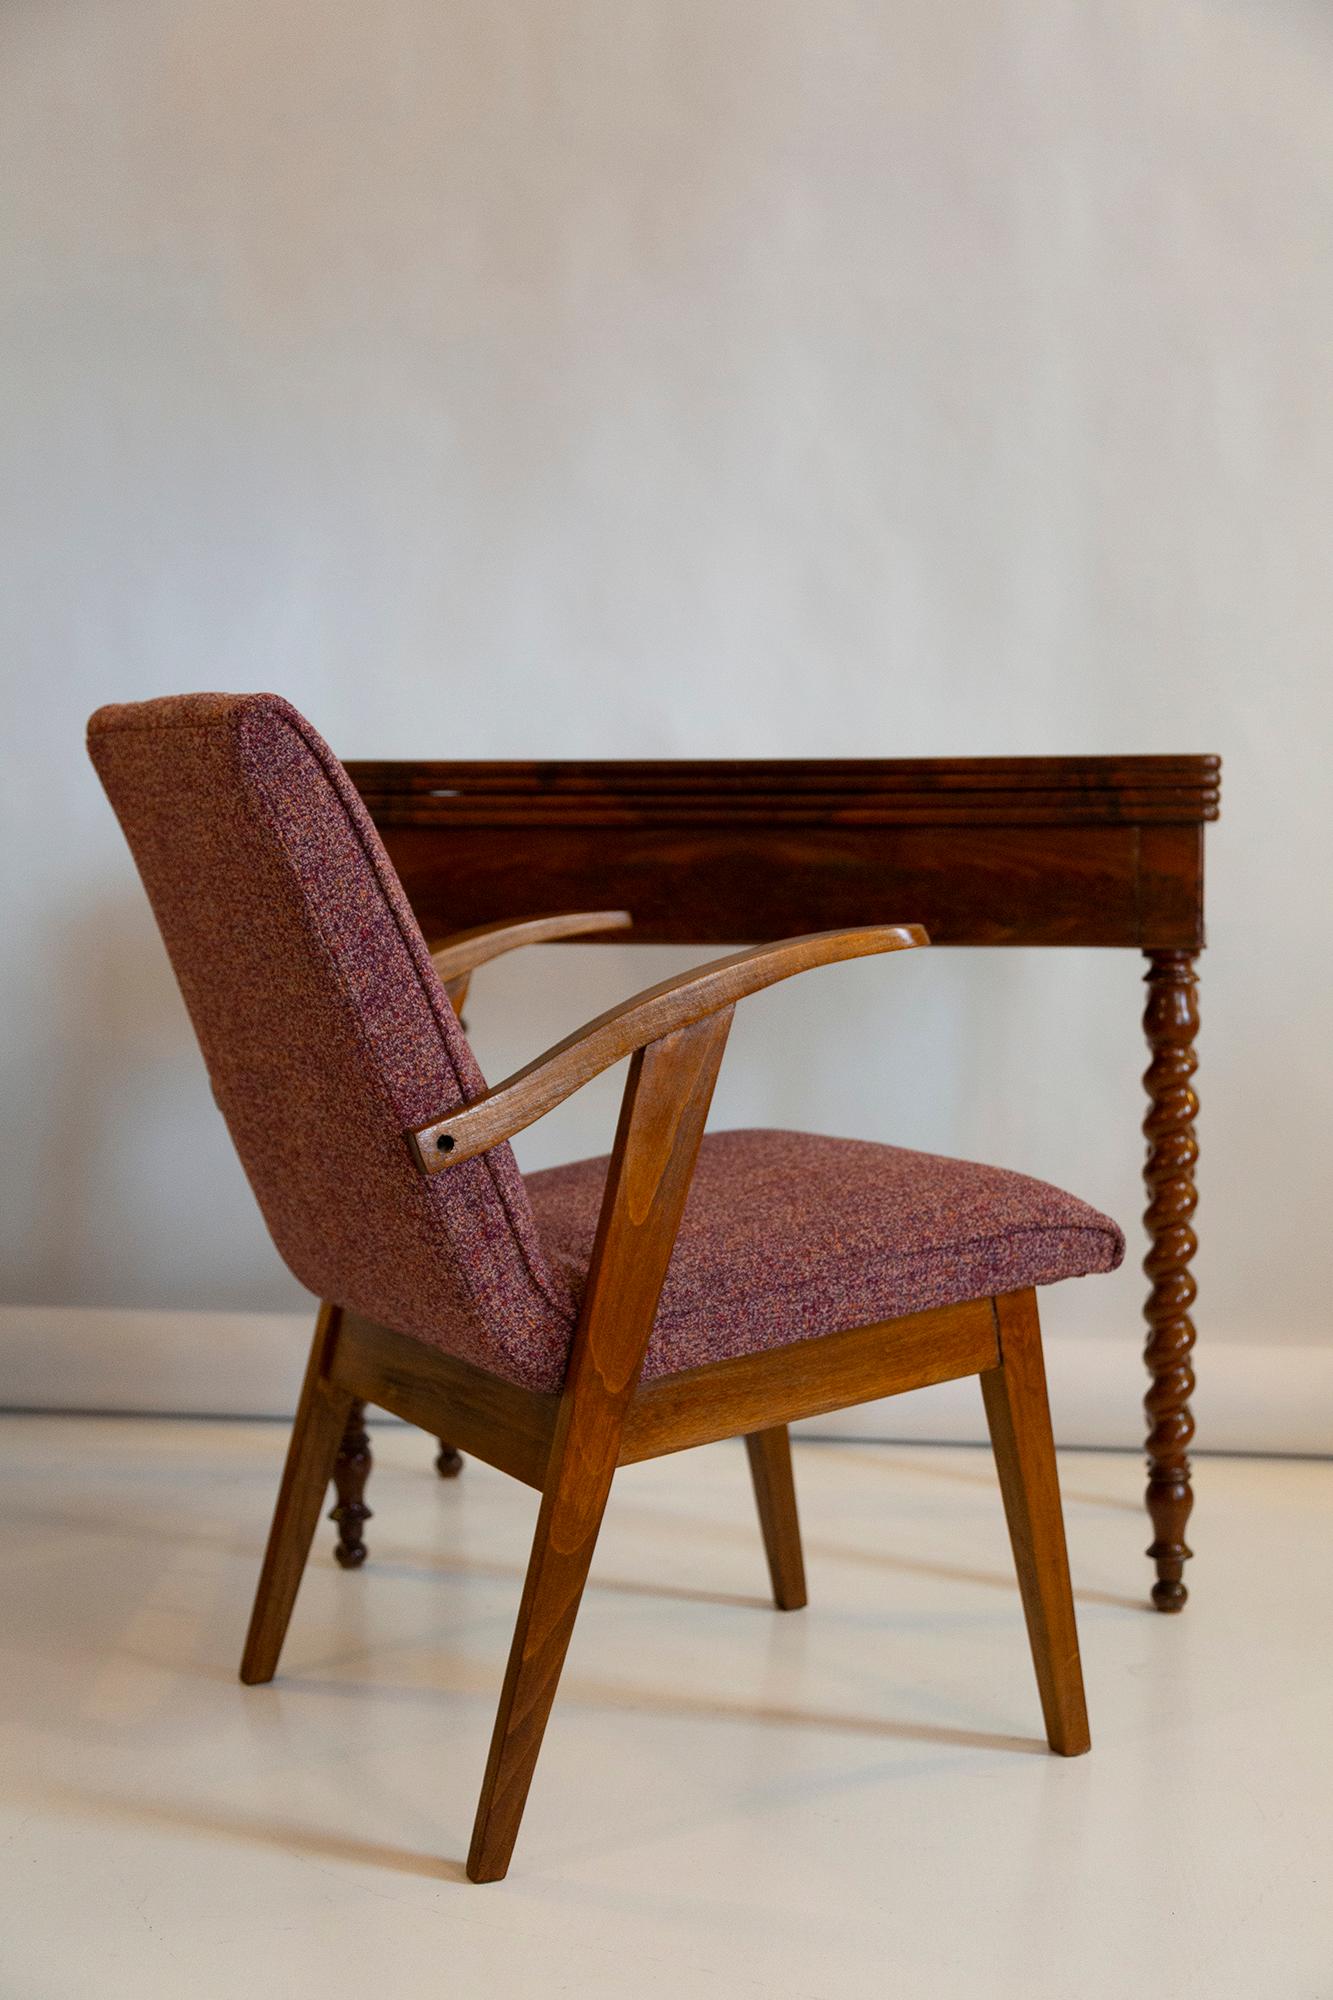 Armchair designed by Mieczyslaw Puchala. Dark brown wood combined with a purple melange beautiful fabric gives it elegance and nobility. The chair has undergone a full carpentry and upholstery renovation. The wood is in excellent condition after